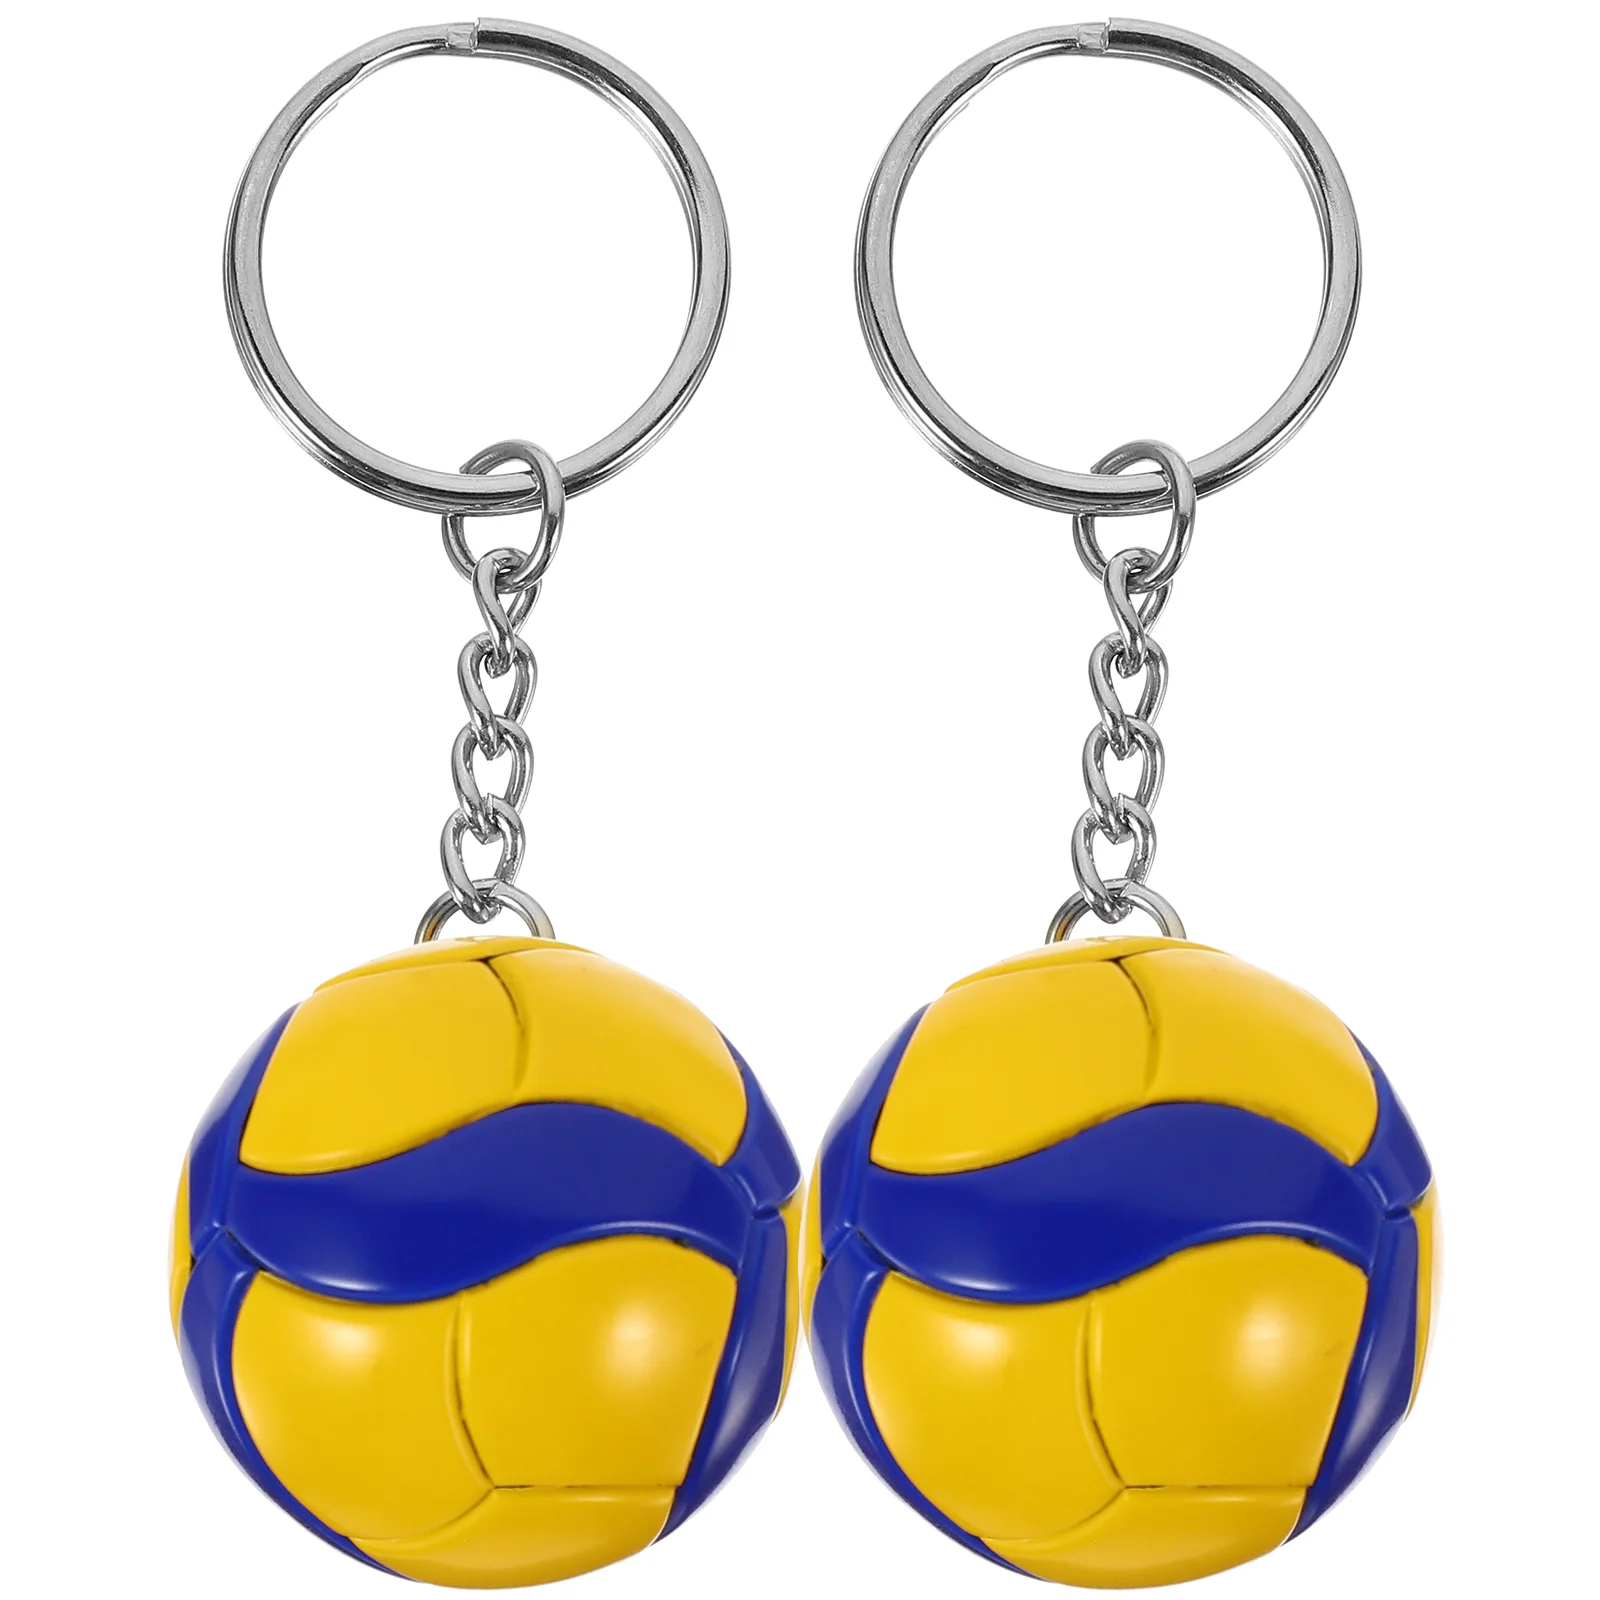 

2 Pcs Volleyball Model Toy Key Rings Car Keys Compact Bag Pendant Keychain Decorative Hanging Child Children Adorable